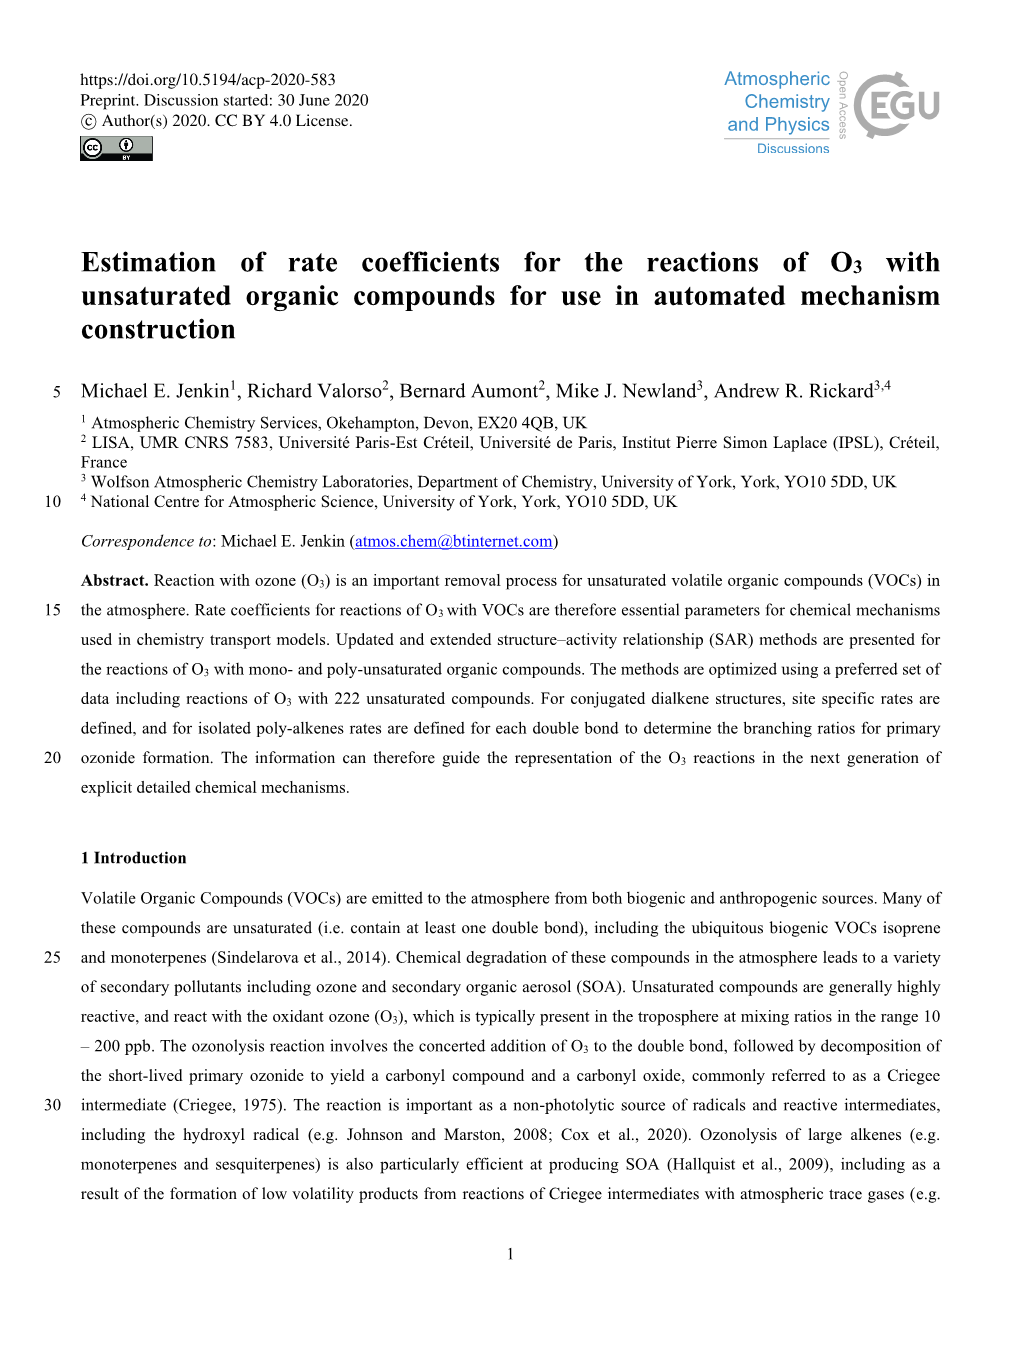 Estimation of Rate Coefficients for the Reactions of O3 with Unsaturated Organic Compounds for Use in Automated Mechanism Construction